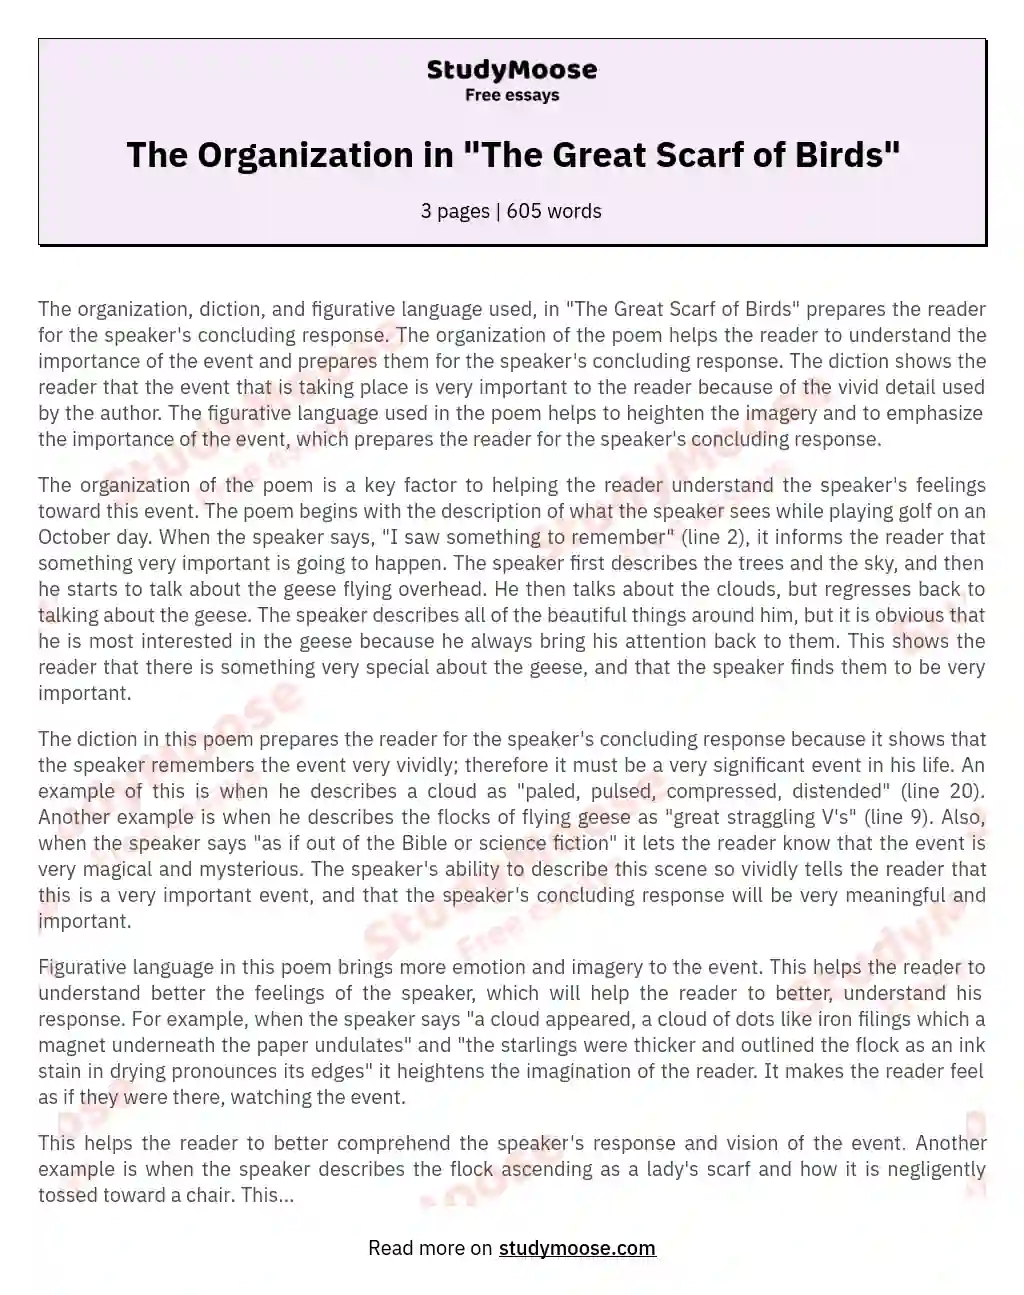 The Organization in "The Great Scarf of Birds" essay